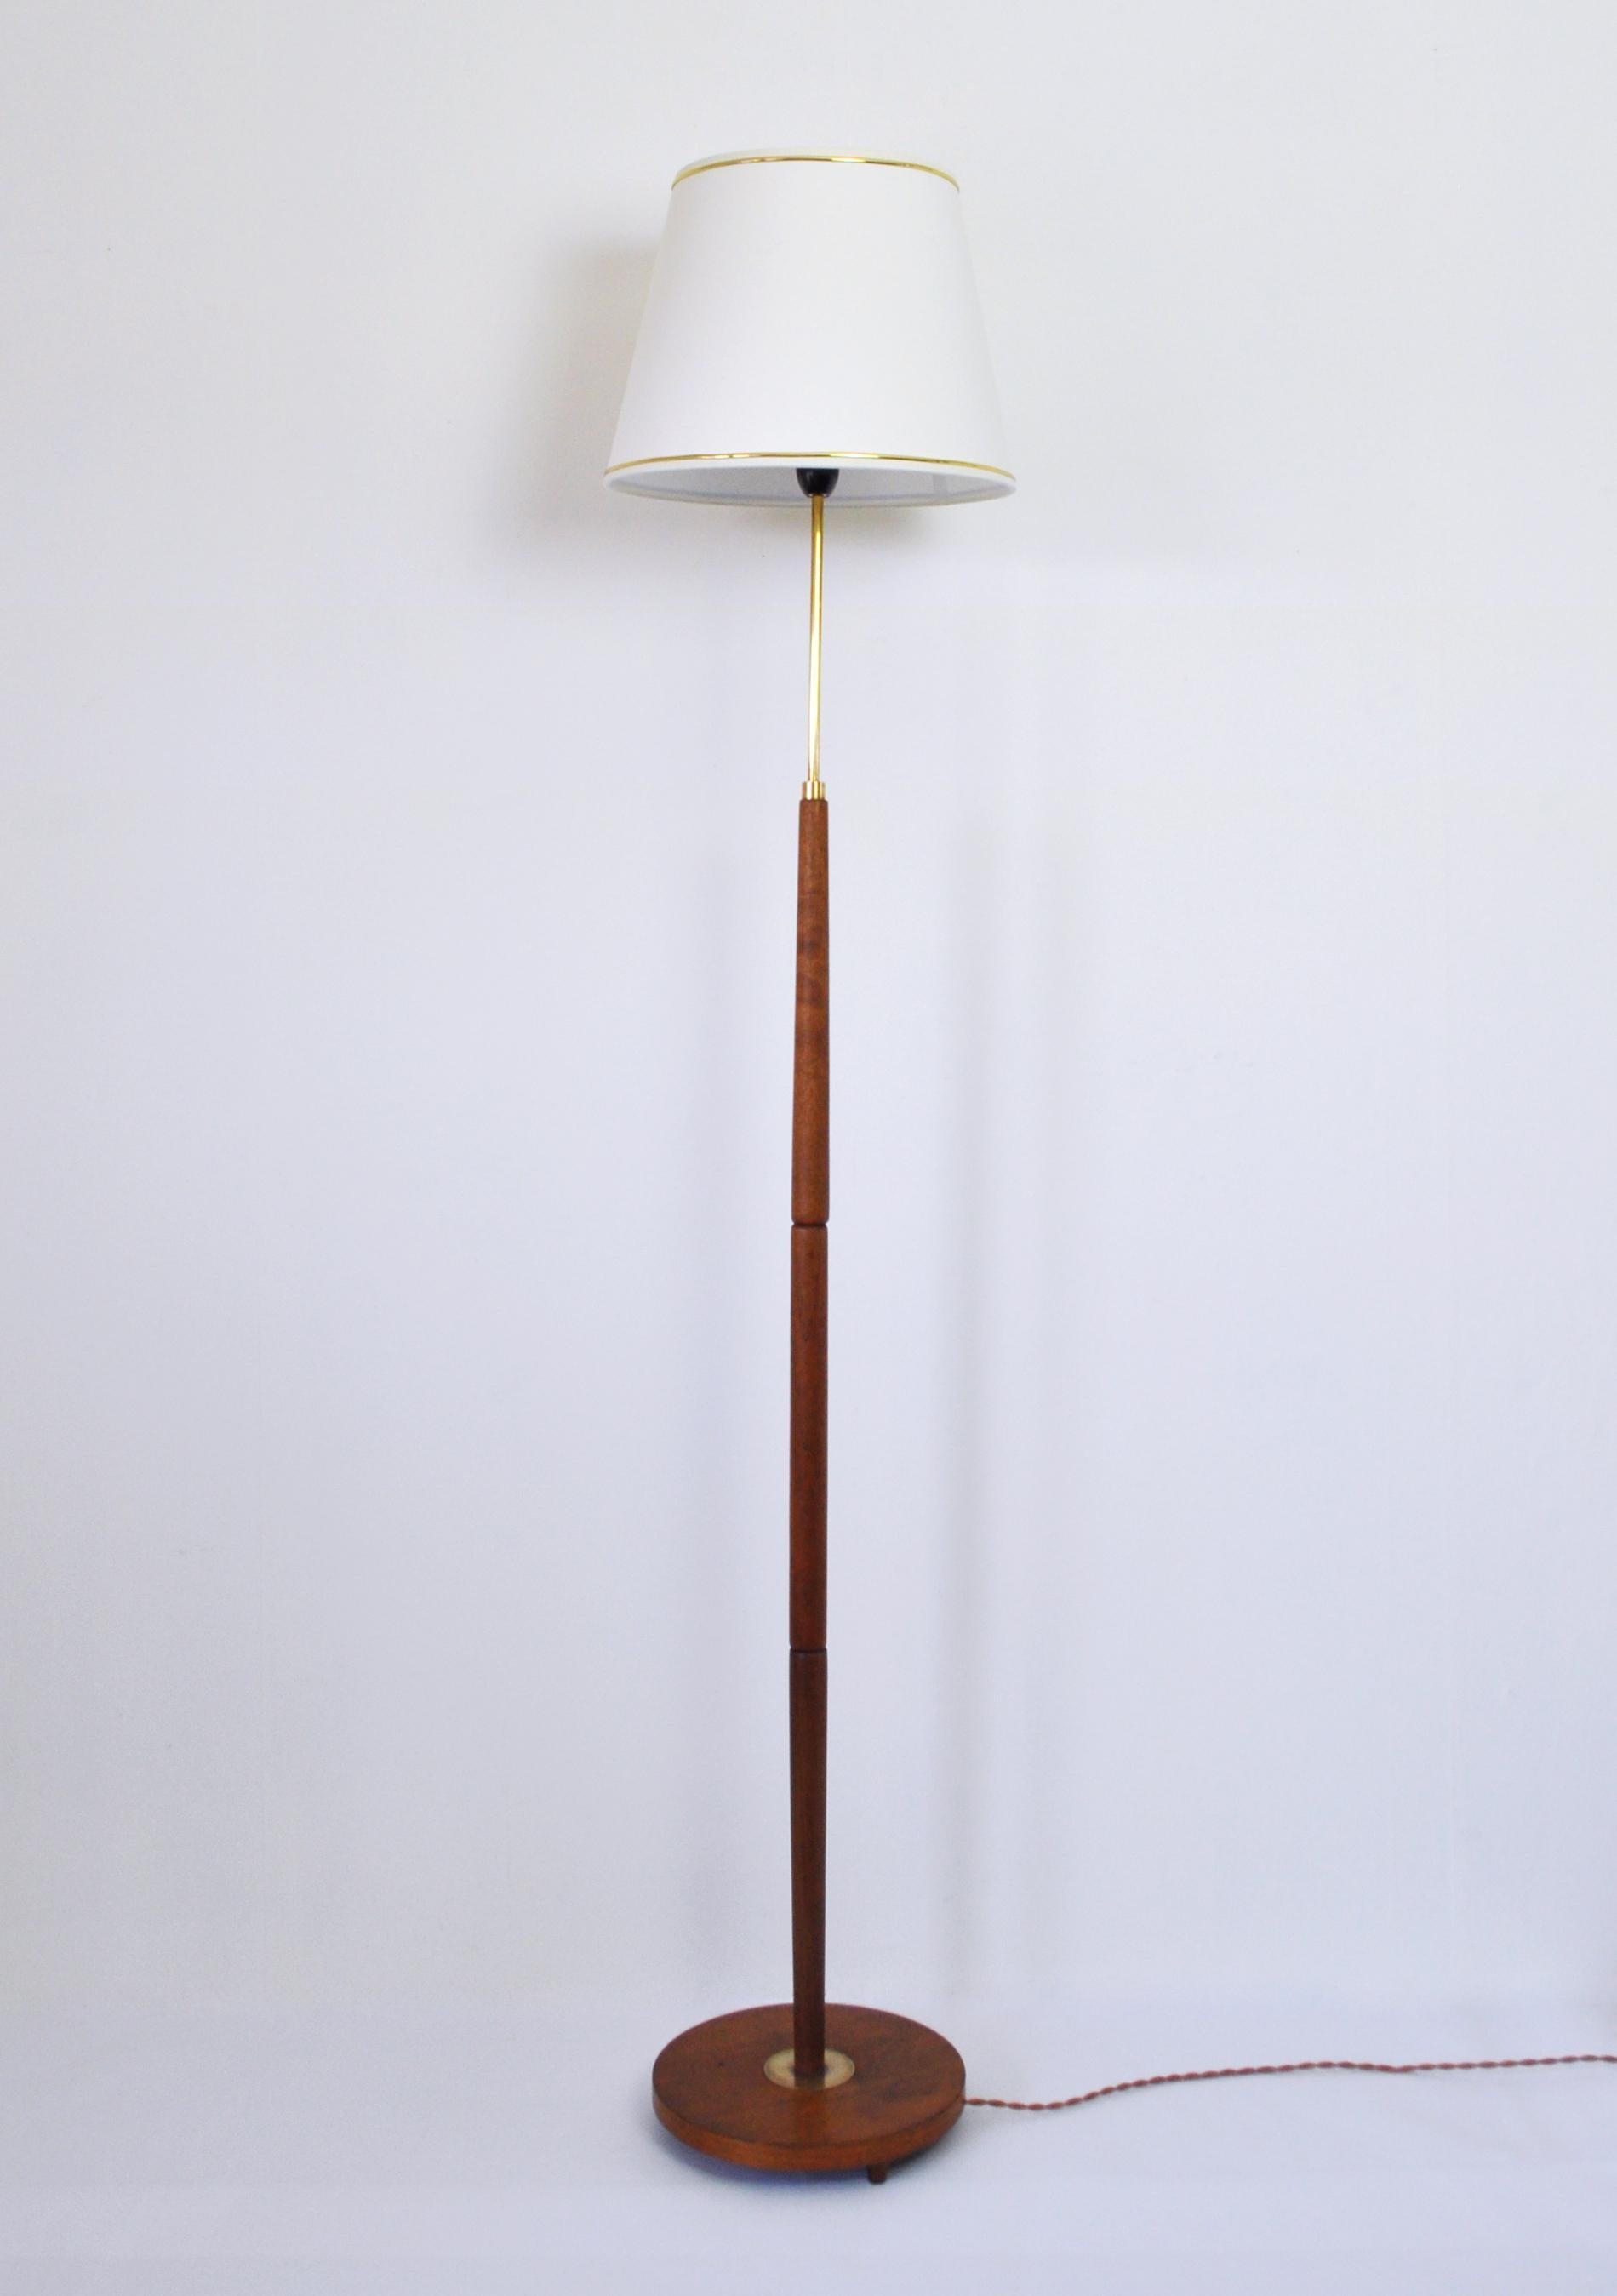 Mid-Century Modern teak floor lamp with brass details. 
Denmark the 1960s. 
Item comes without shade.

Lamp base: diameter 26 cm
Height 140 cm to socket.